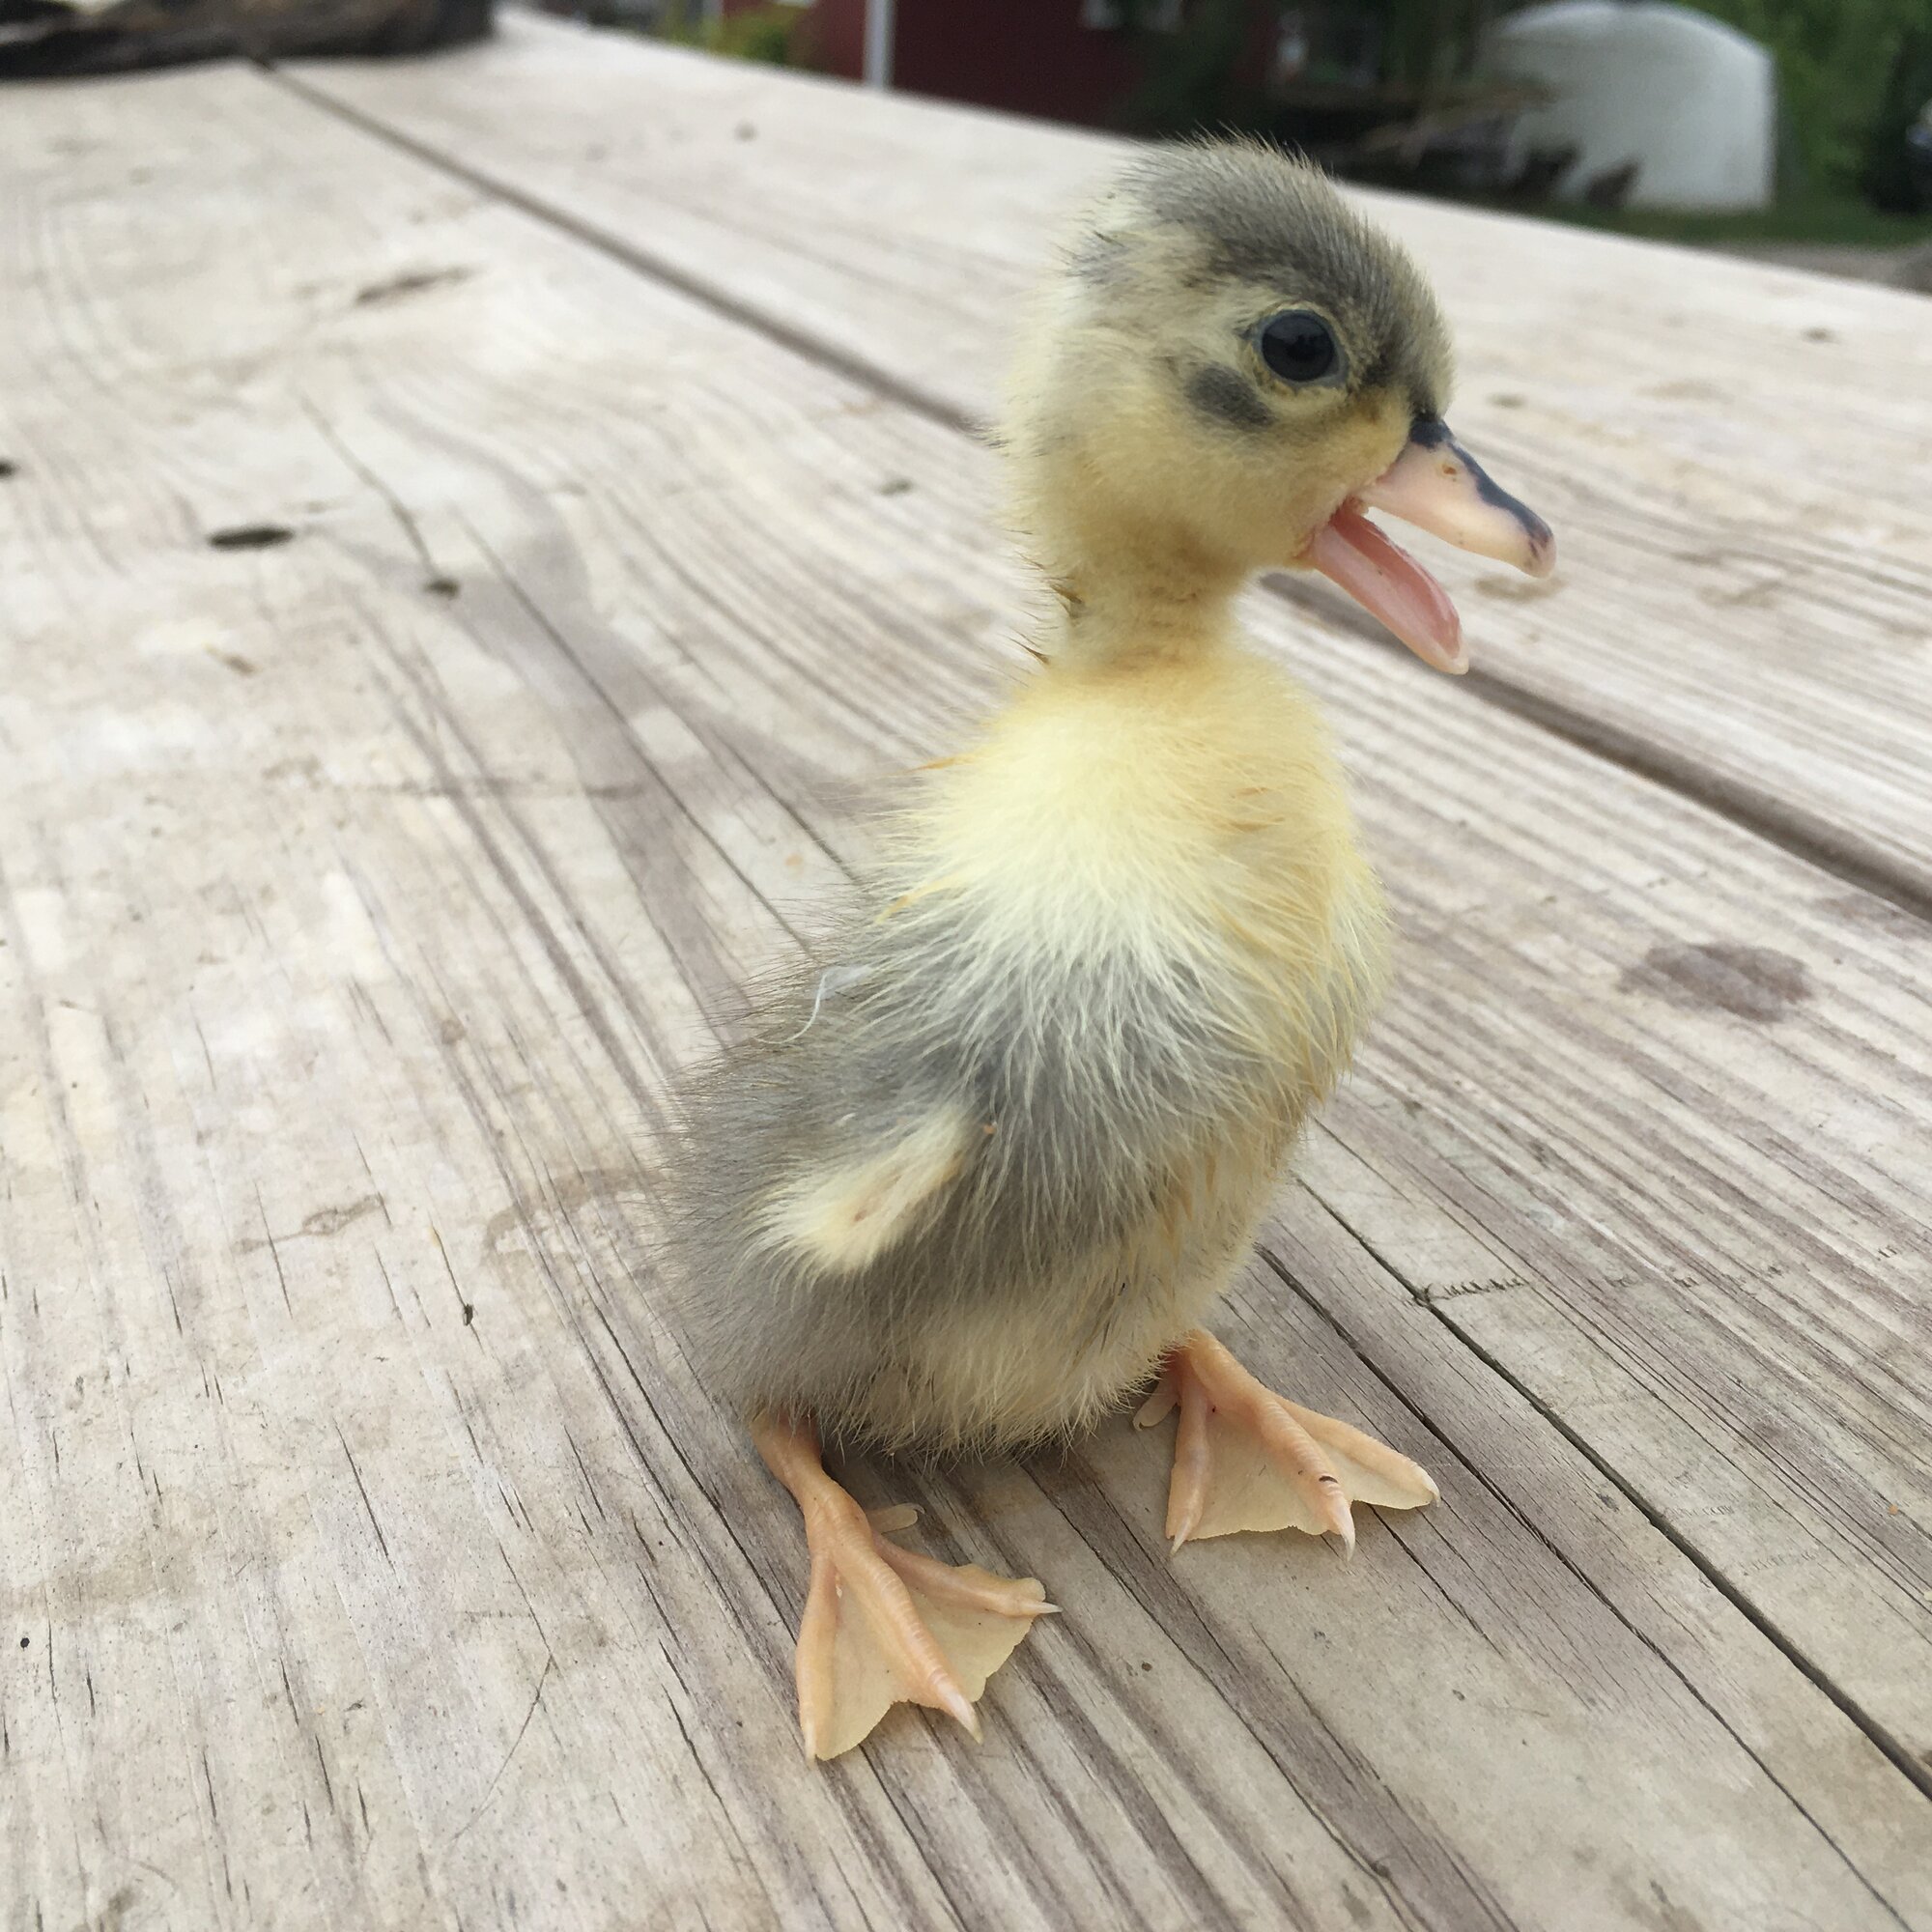 https://www.backyardchickens.com/articles/assisting-call-duck-hatches.76507/cover-image